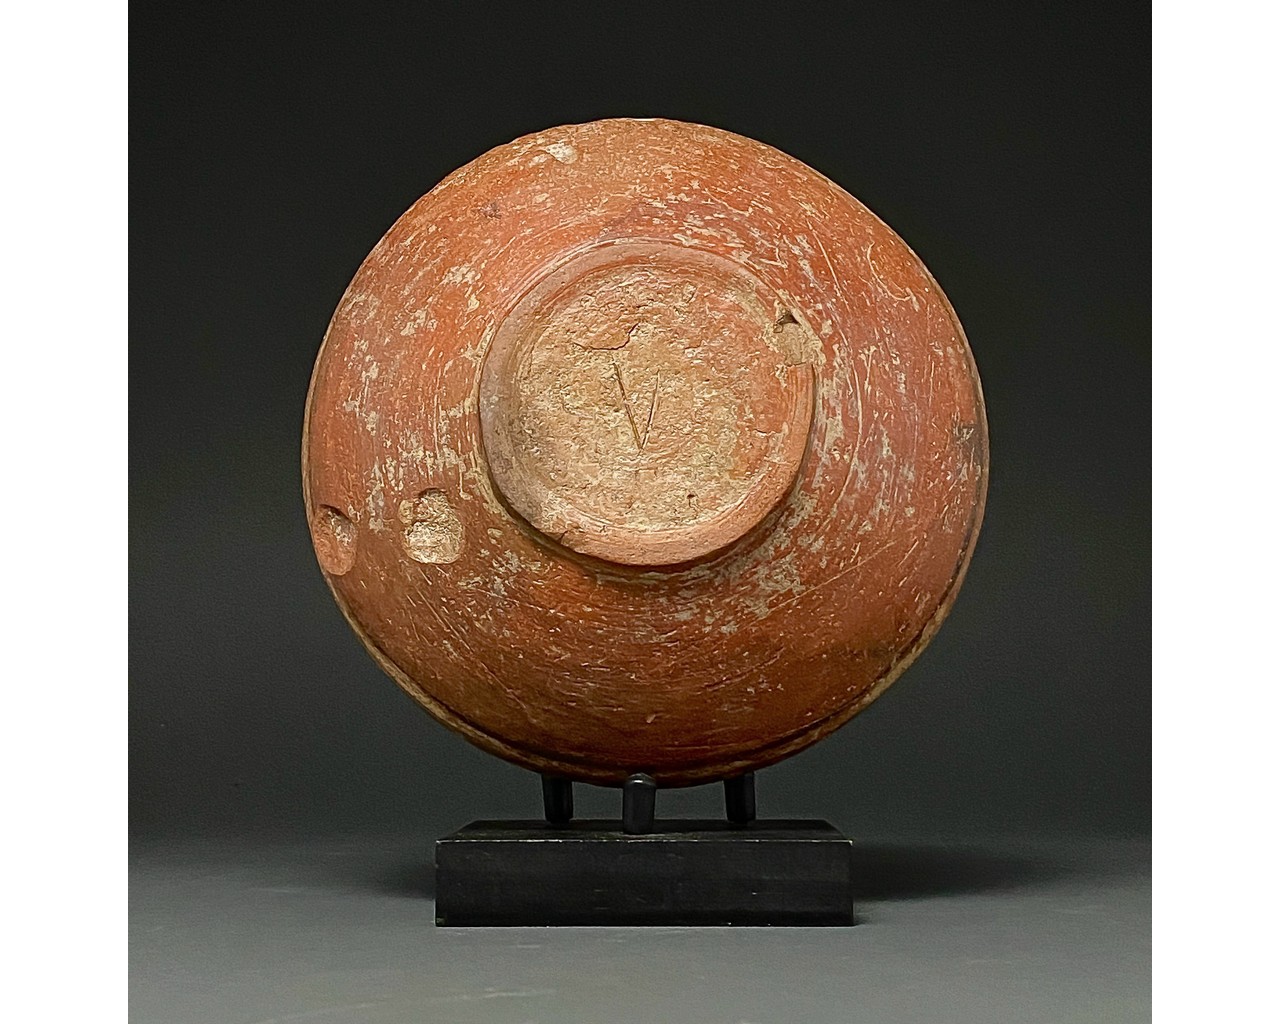 INDUS VALLEY PAINTED POTTERY VESSEL - Image 3 of 5